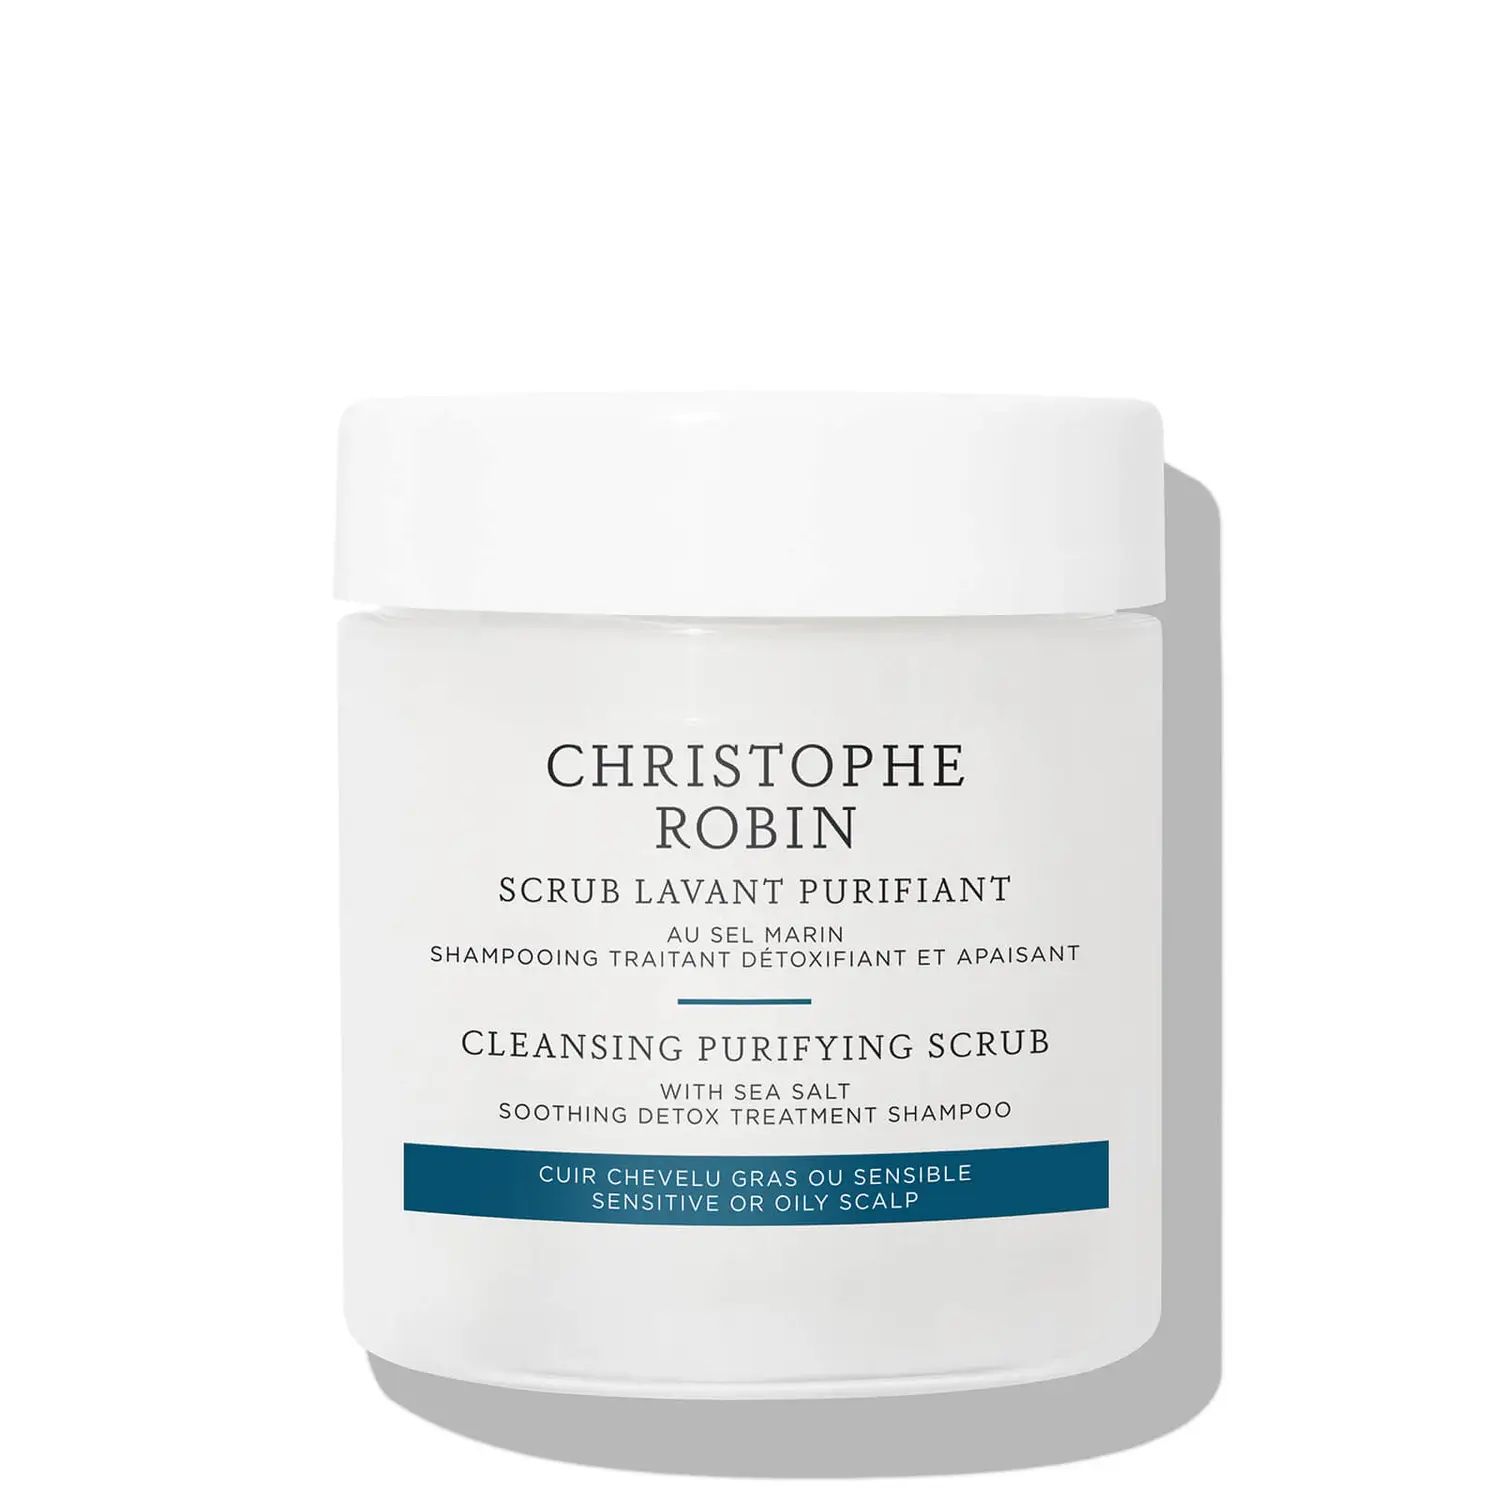 Christophe Robin Cleansing Purifying Scrub with Sea Salt 75ml | Dermstore (US)